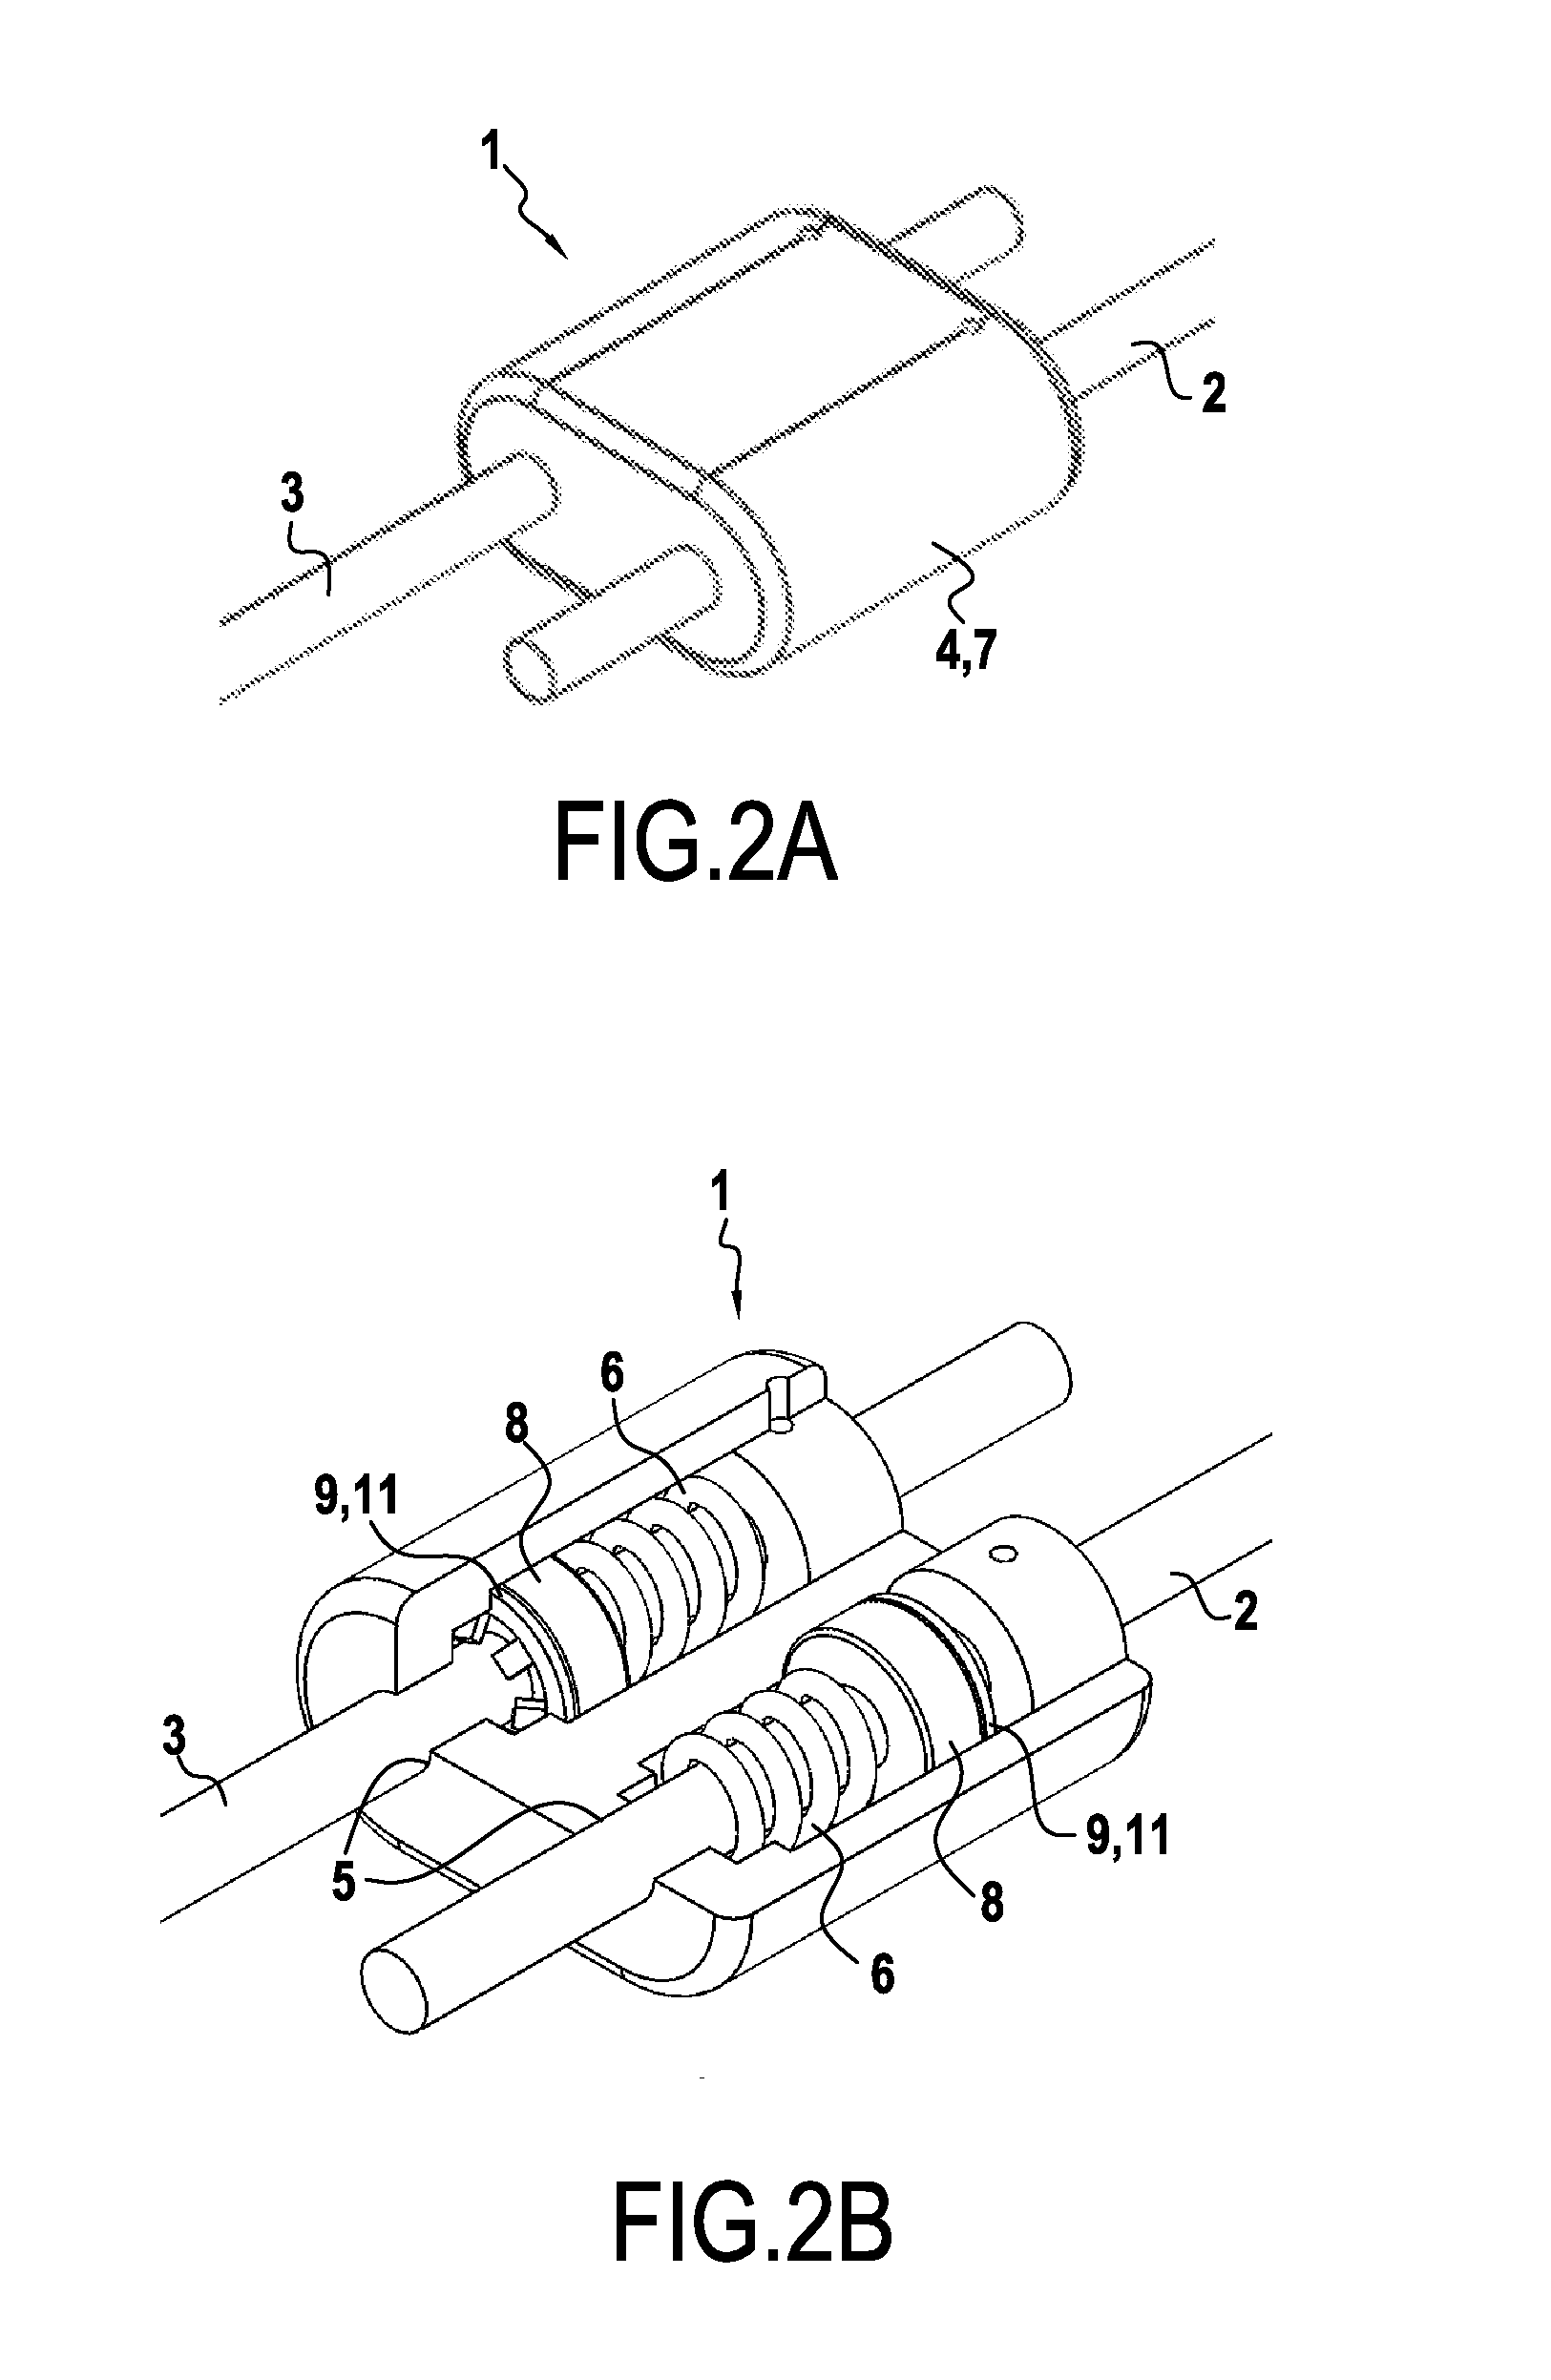 Device for correcting scoliosis and controlling vertebral arthrodesis